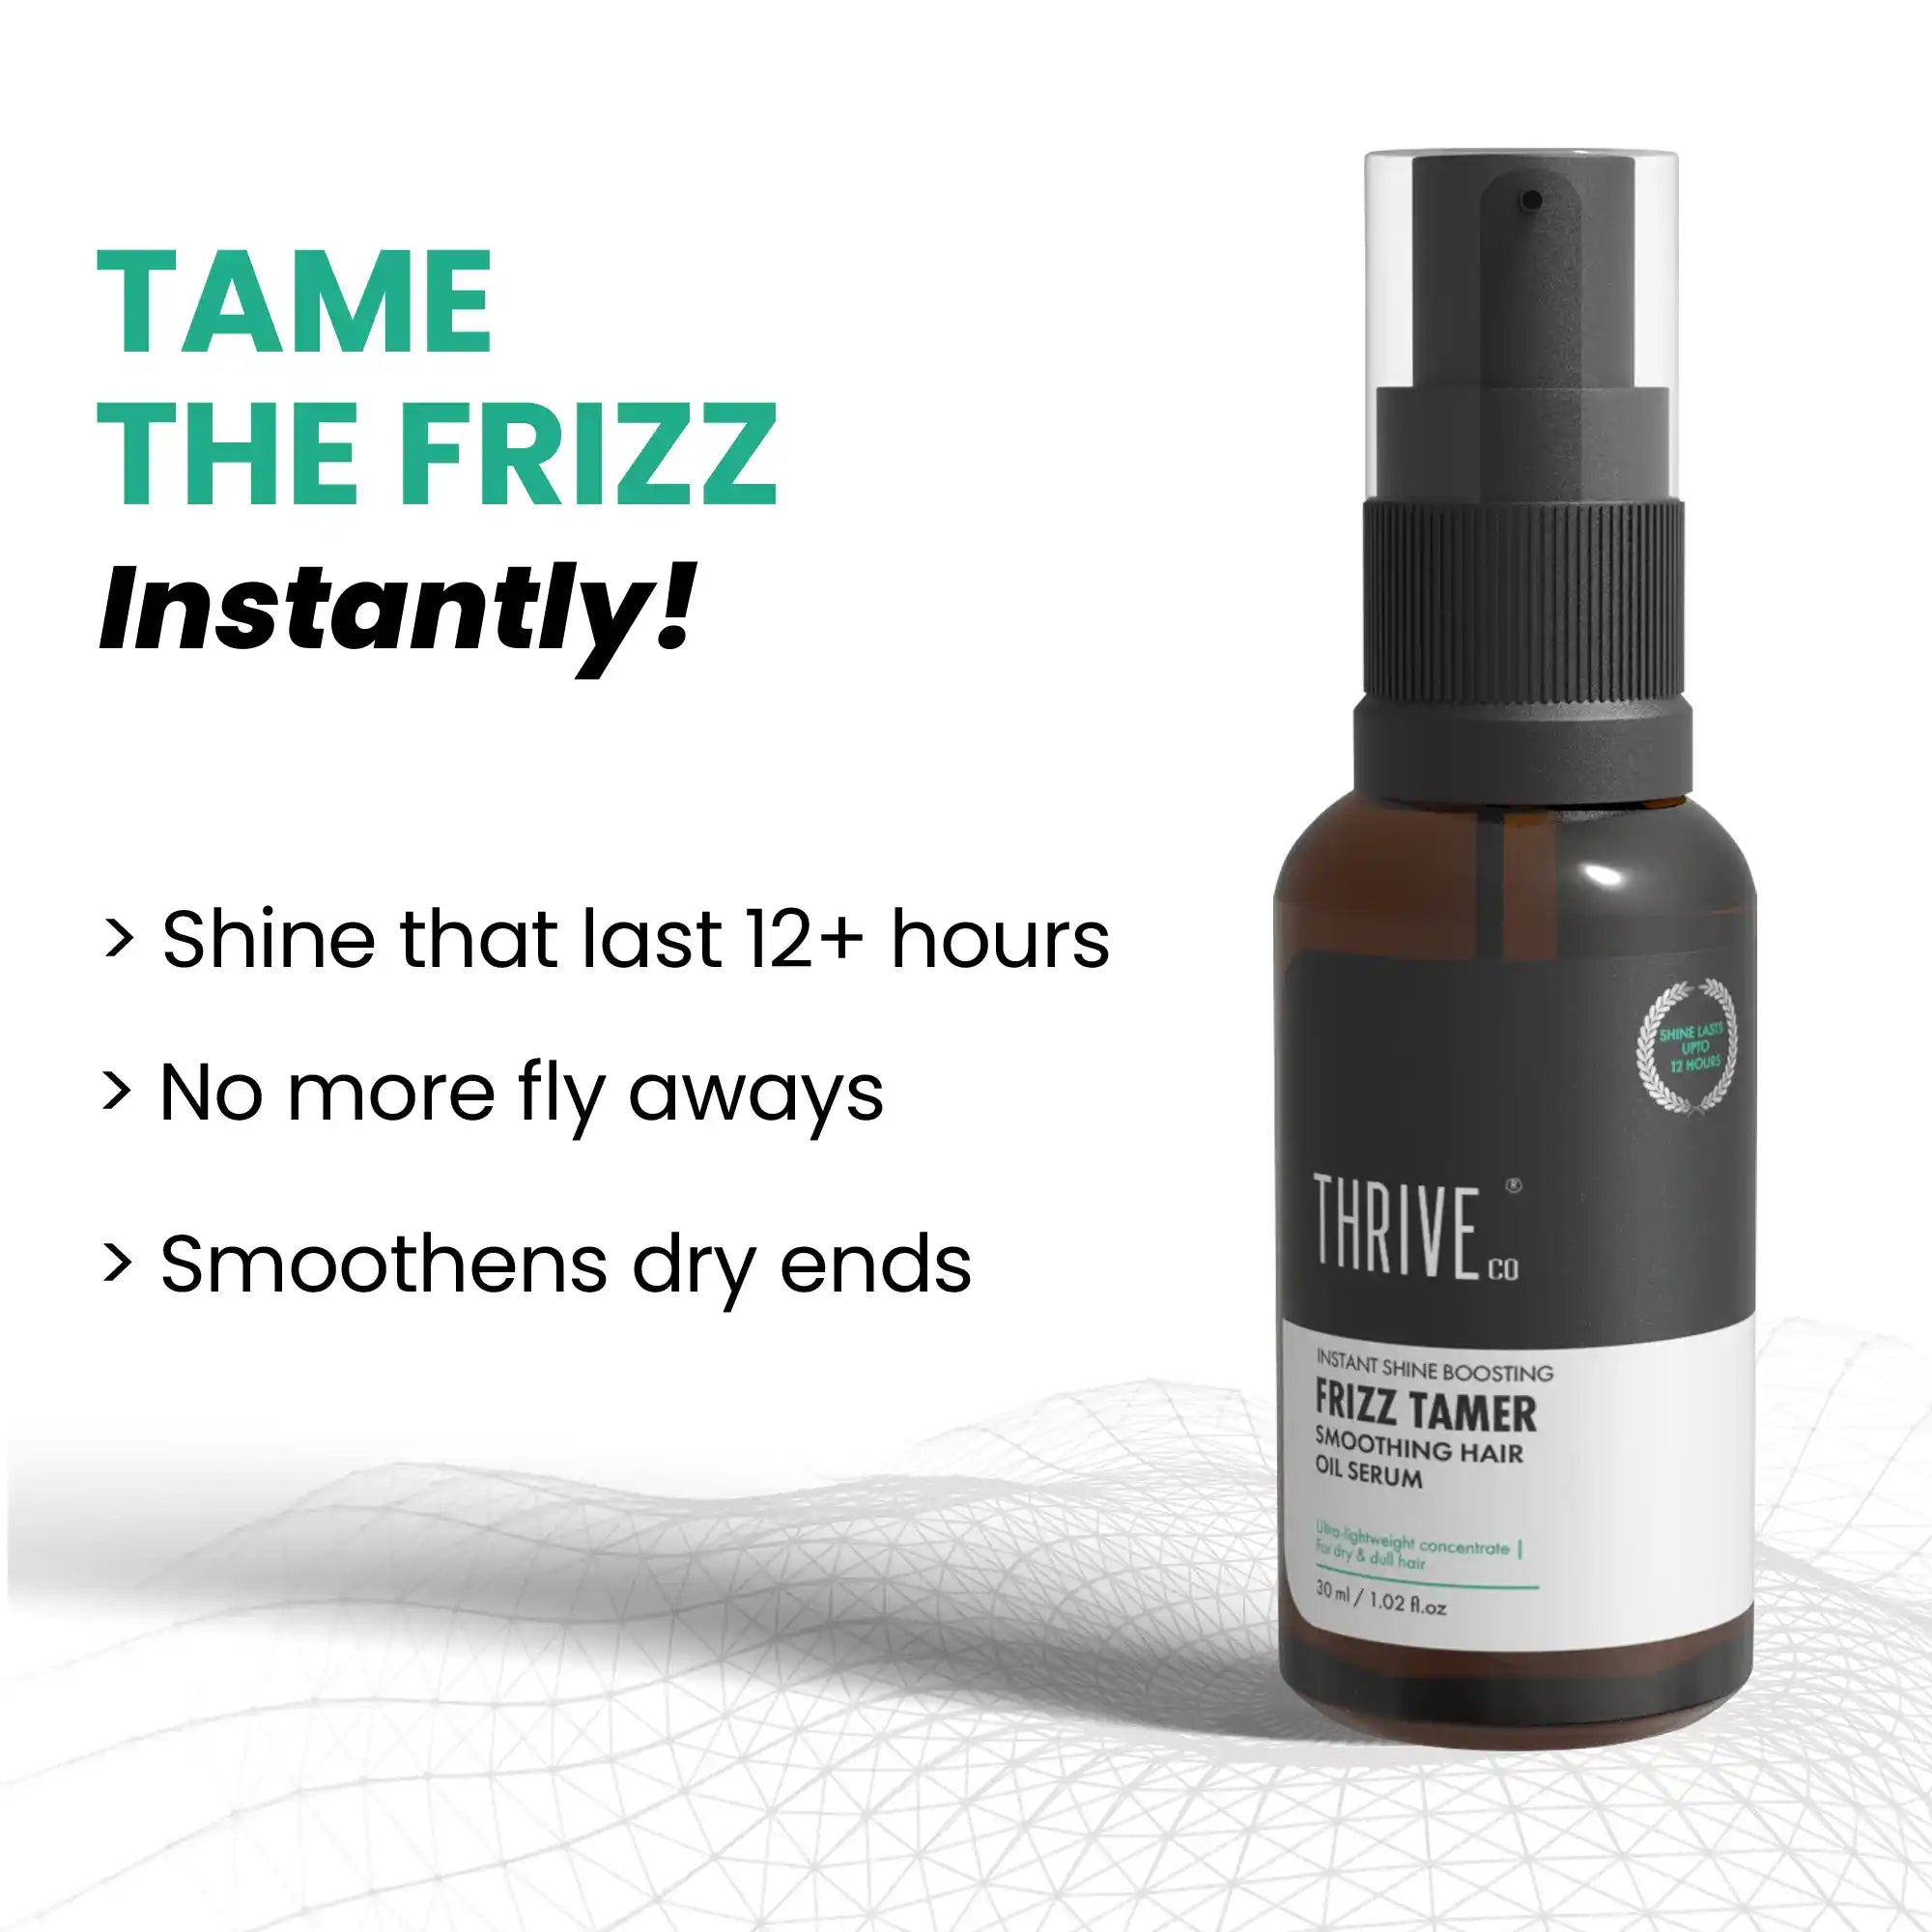 ThriveCo Frizz Tamer Smoothing Hair Oil Serum for frizzy hair